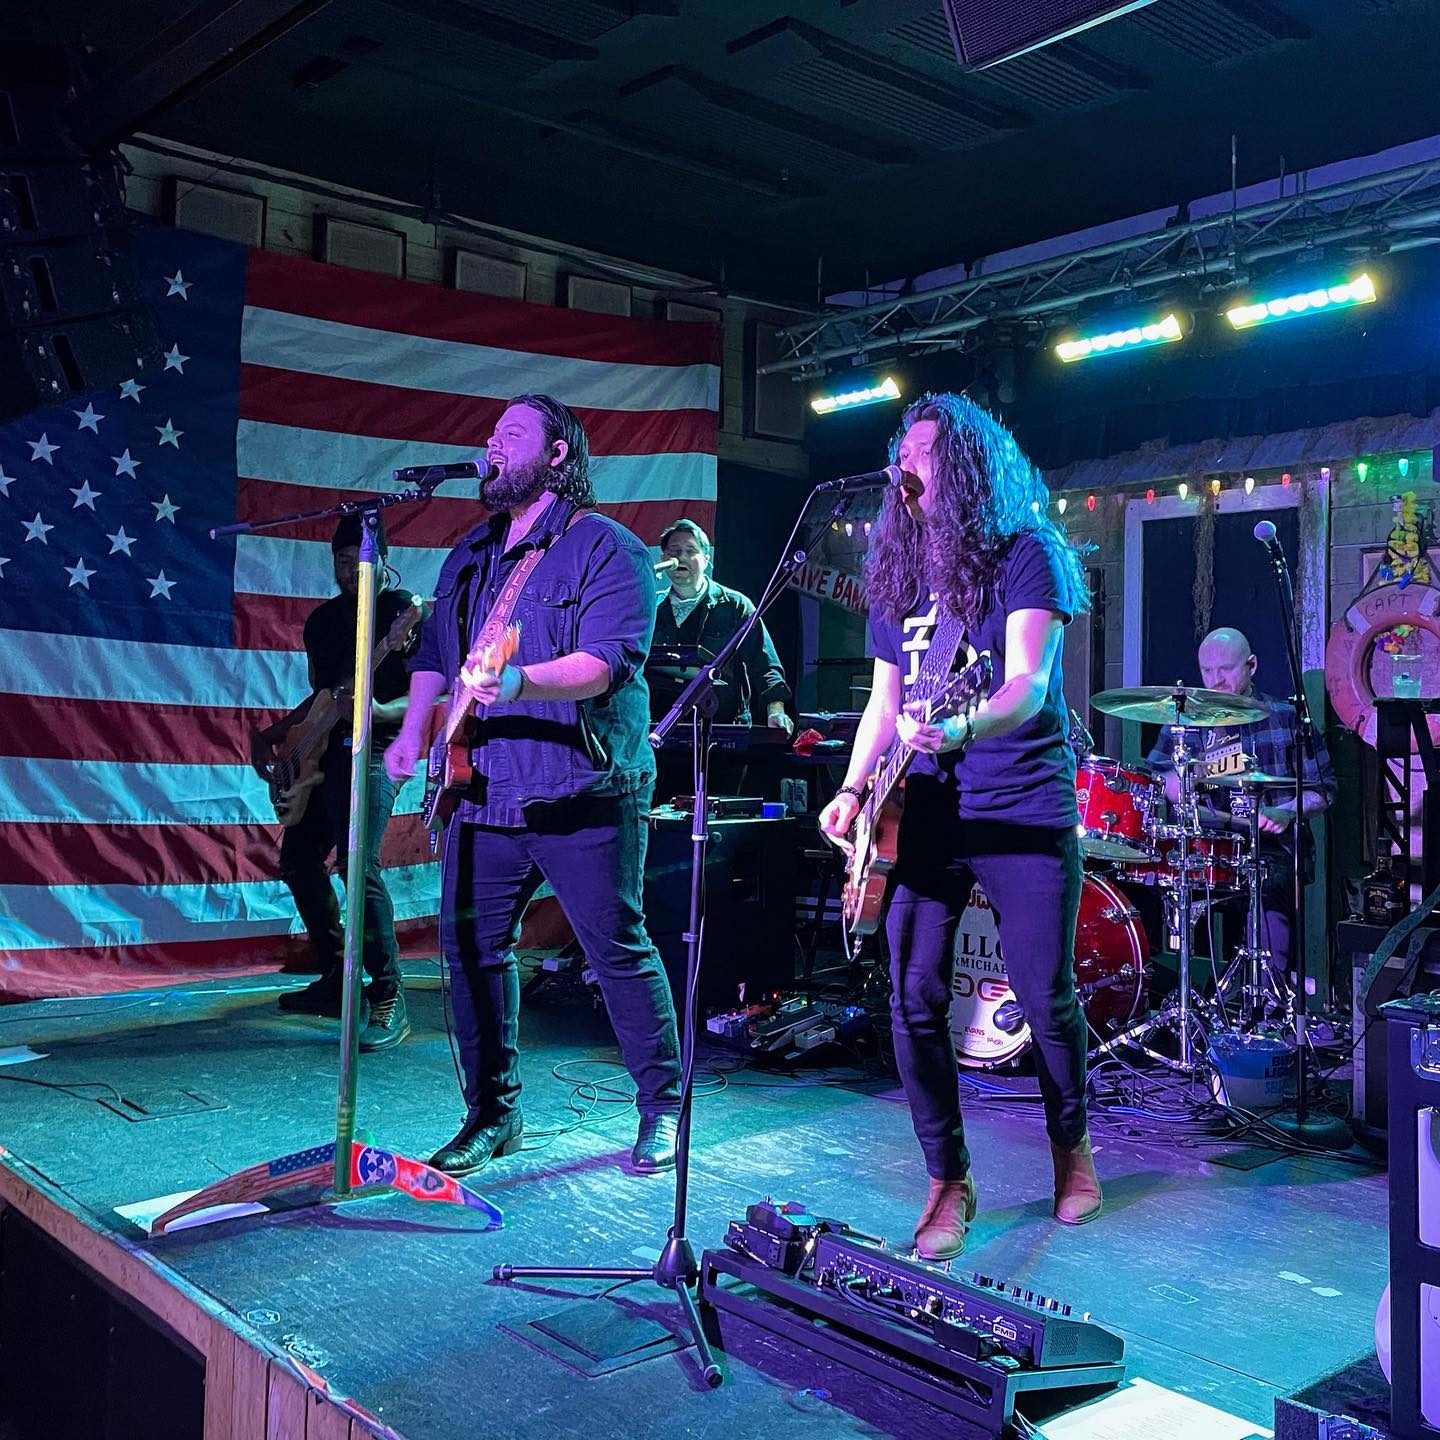 Live music at Tin Roof Myrtle Beach. Photo by Instagram user @tinroofmyrtlebeach.